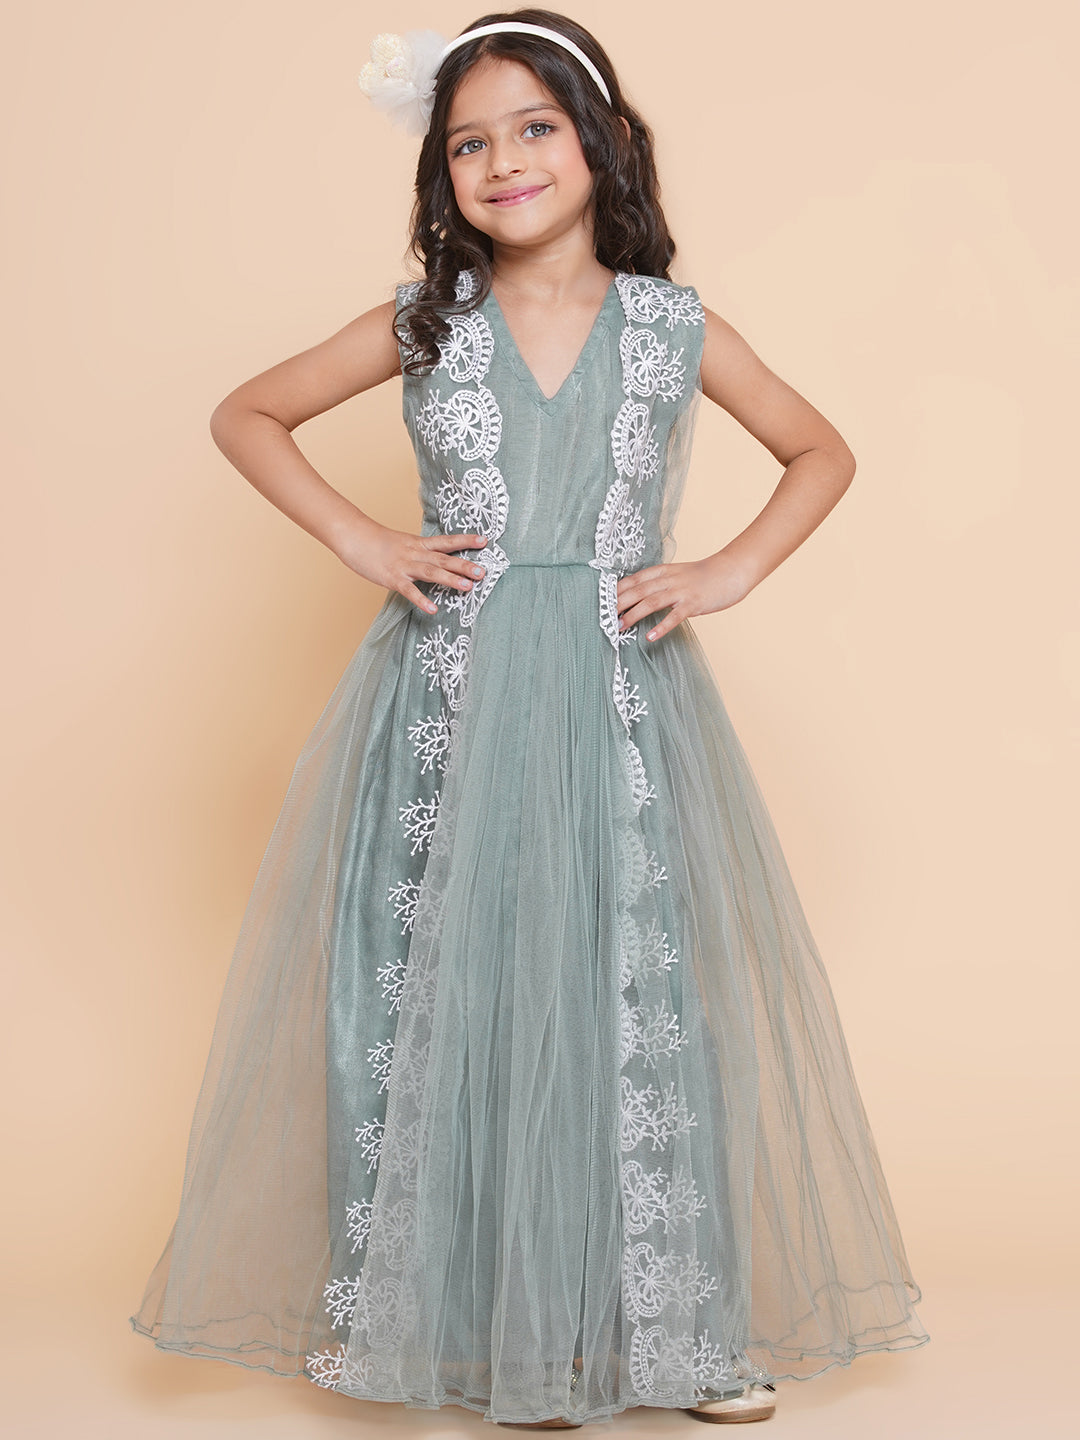 Any Kids Presents D.No.385 Exclusive Designer Butterfly Net with embroidery  and handwork kidswear Gown Catalog Whol… | Kids designer dresses, Gowns for  girls, Gowns